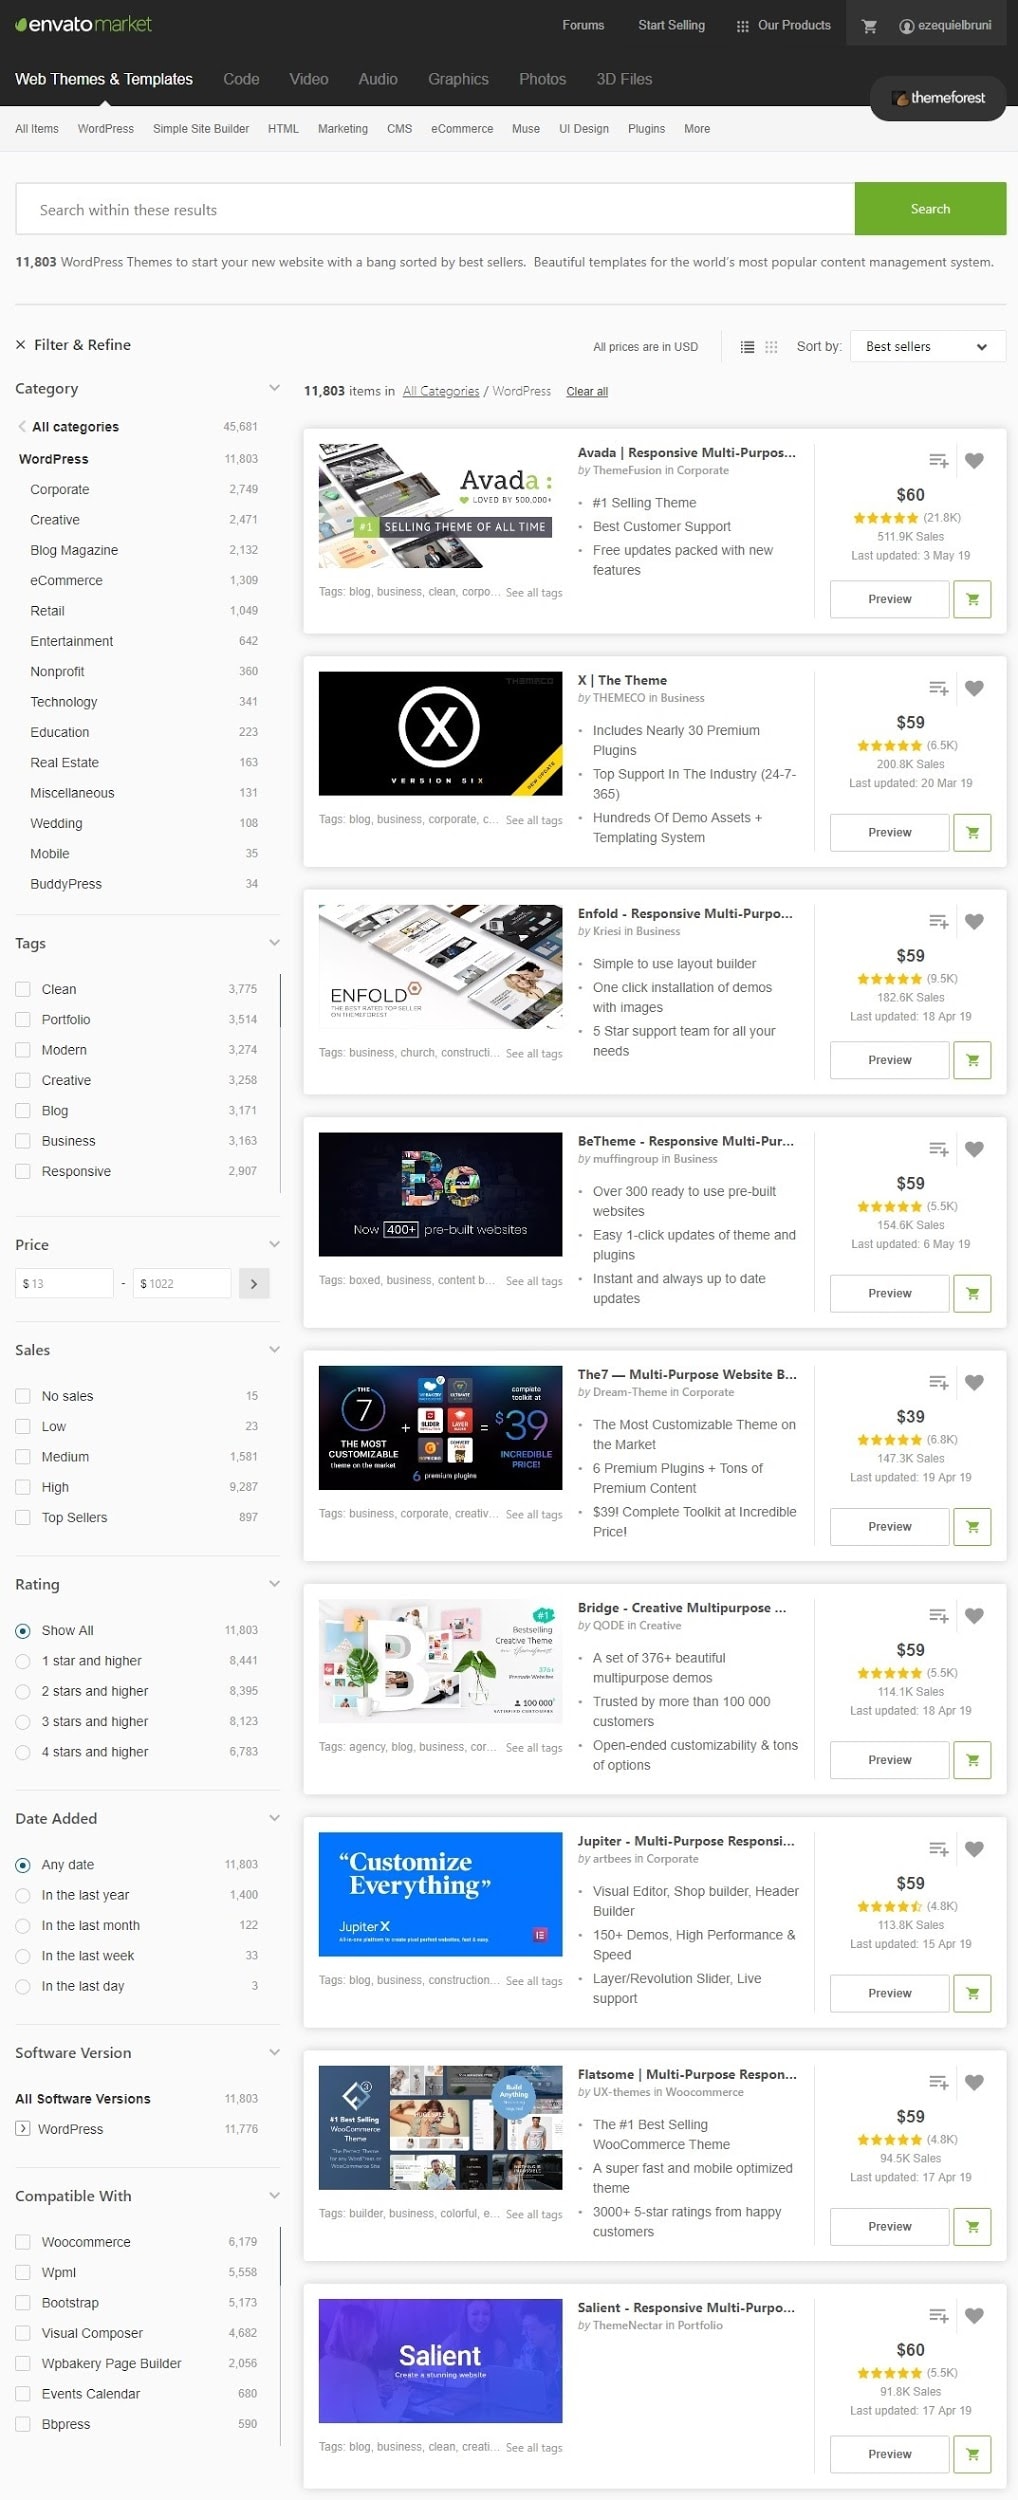 ThemeForest Review – The Truth about this Marketplace 2023-image1